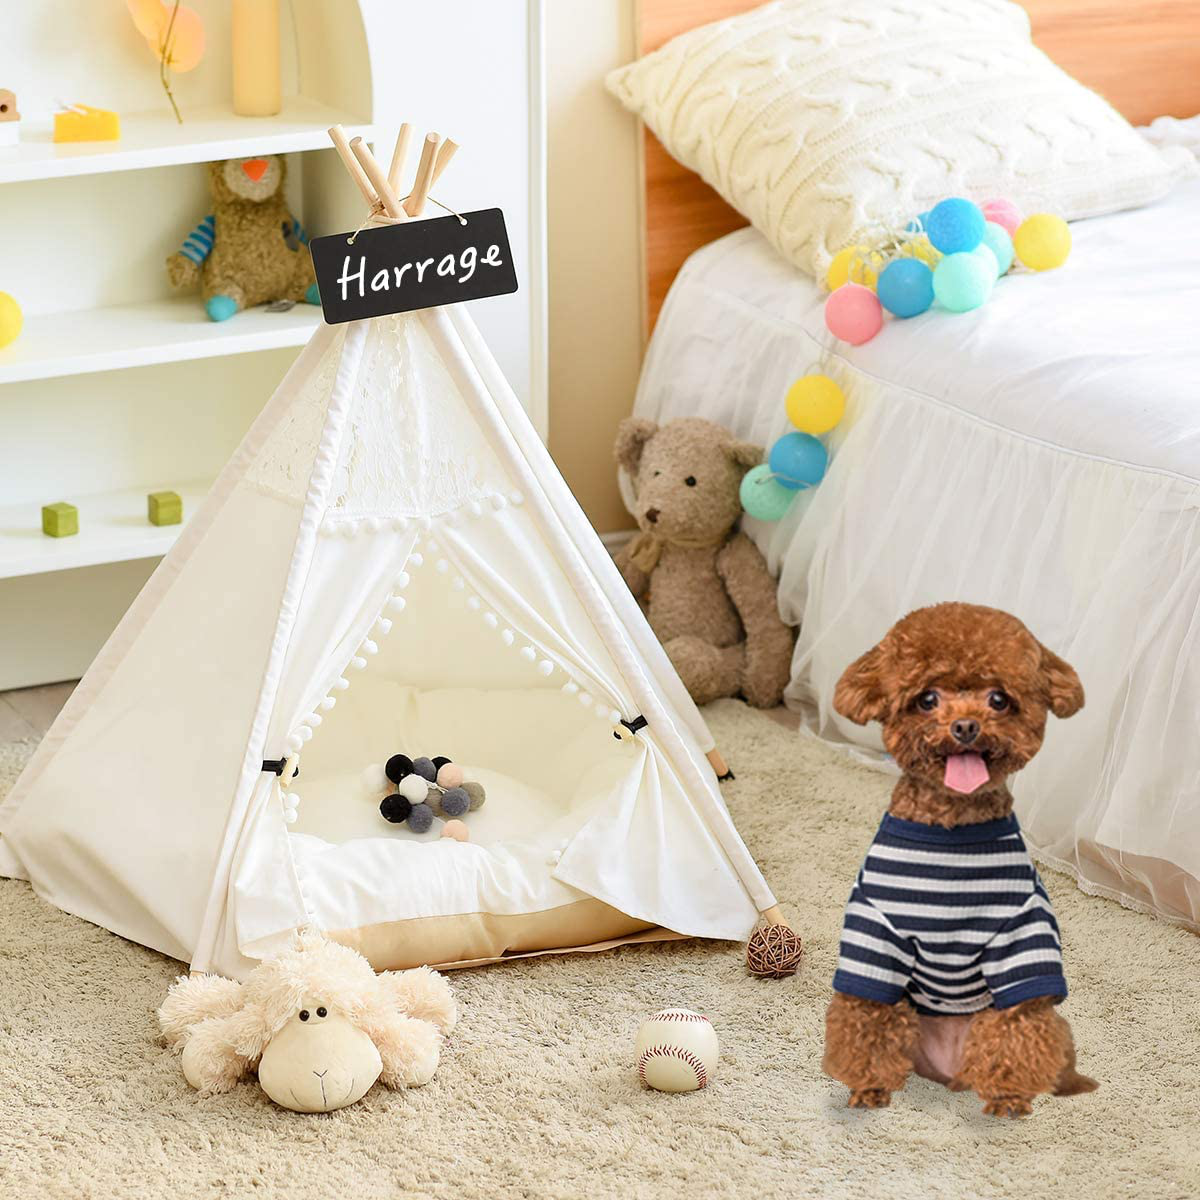 Harrage Folding Indoor Dogs House, Portable Pet Teepee Dog & Cat Tents, 24Inch Small Dog & Cat Cute Puppy House with Cushion Bed Animals & Pet Supplies > Pet Supplies > Dog Supplies > Dog Houses Harrage   